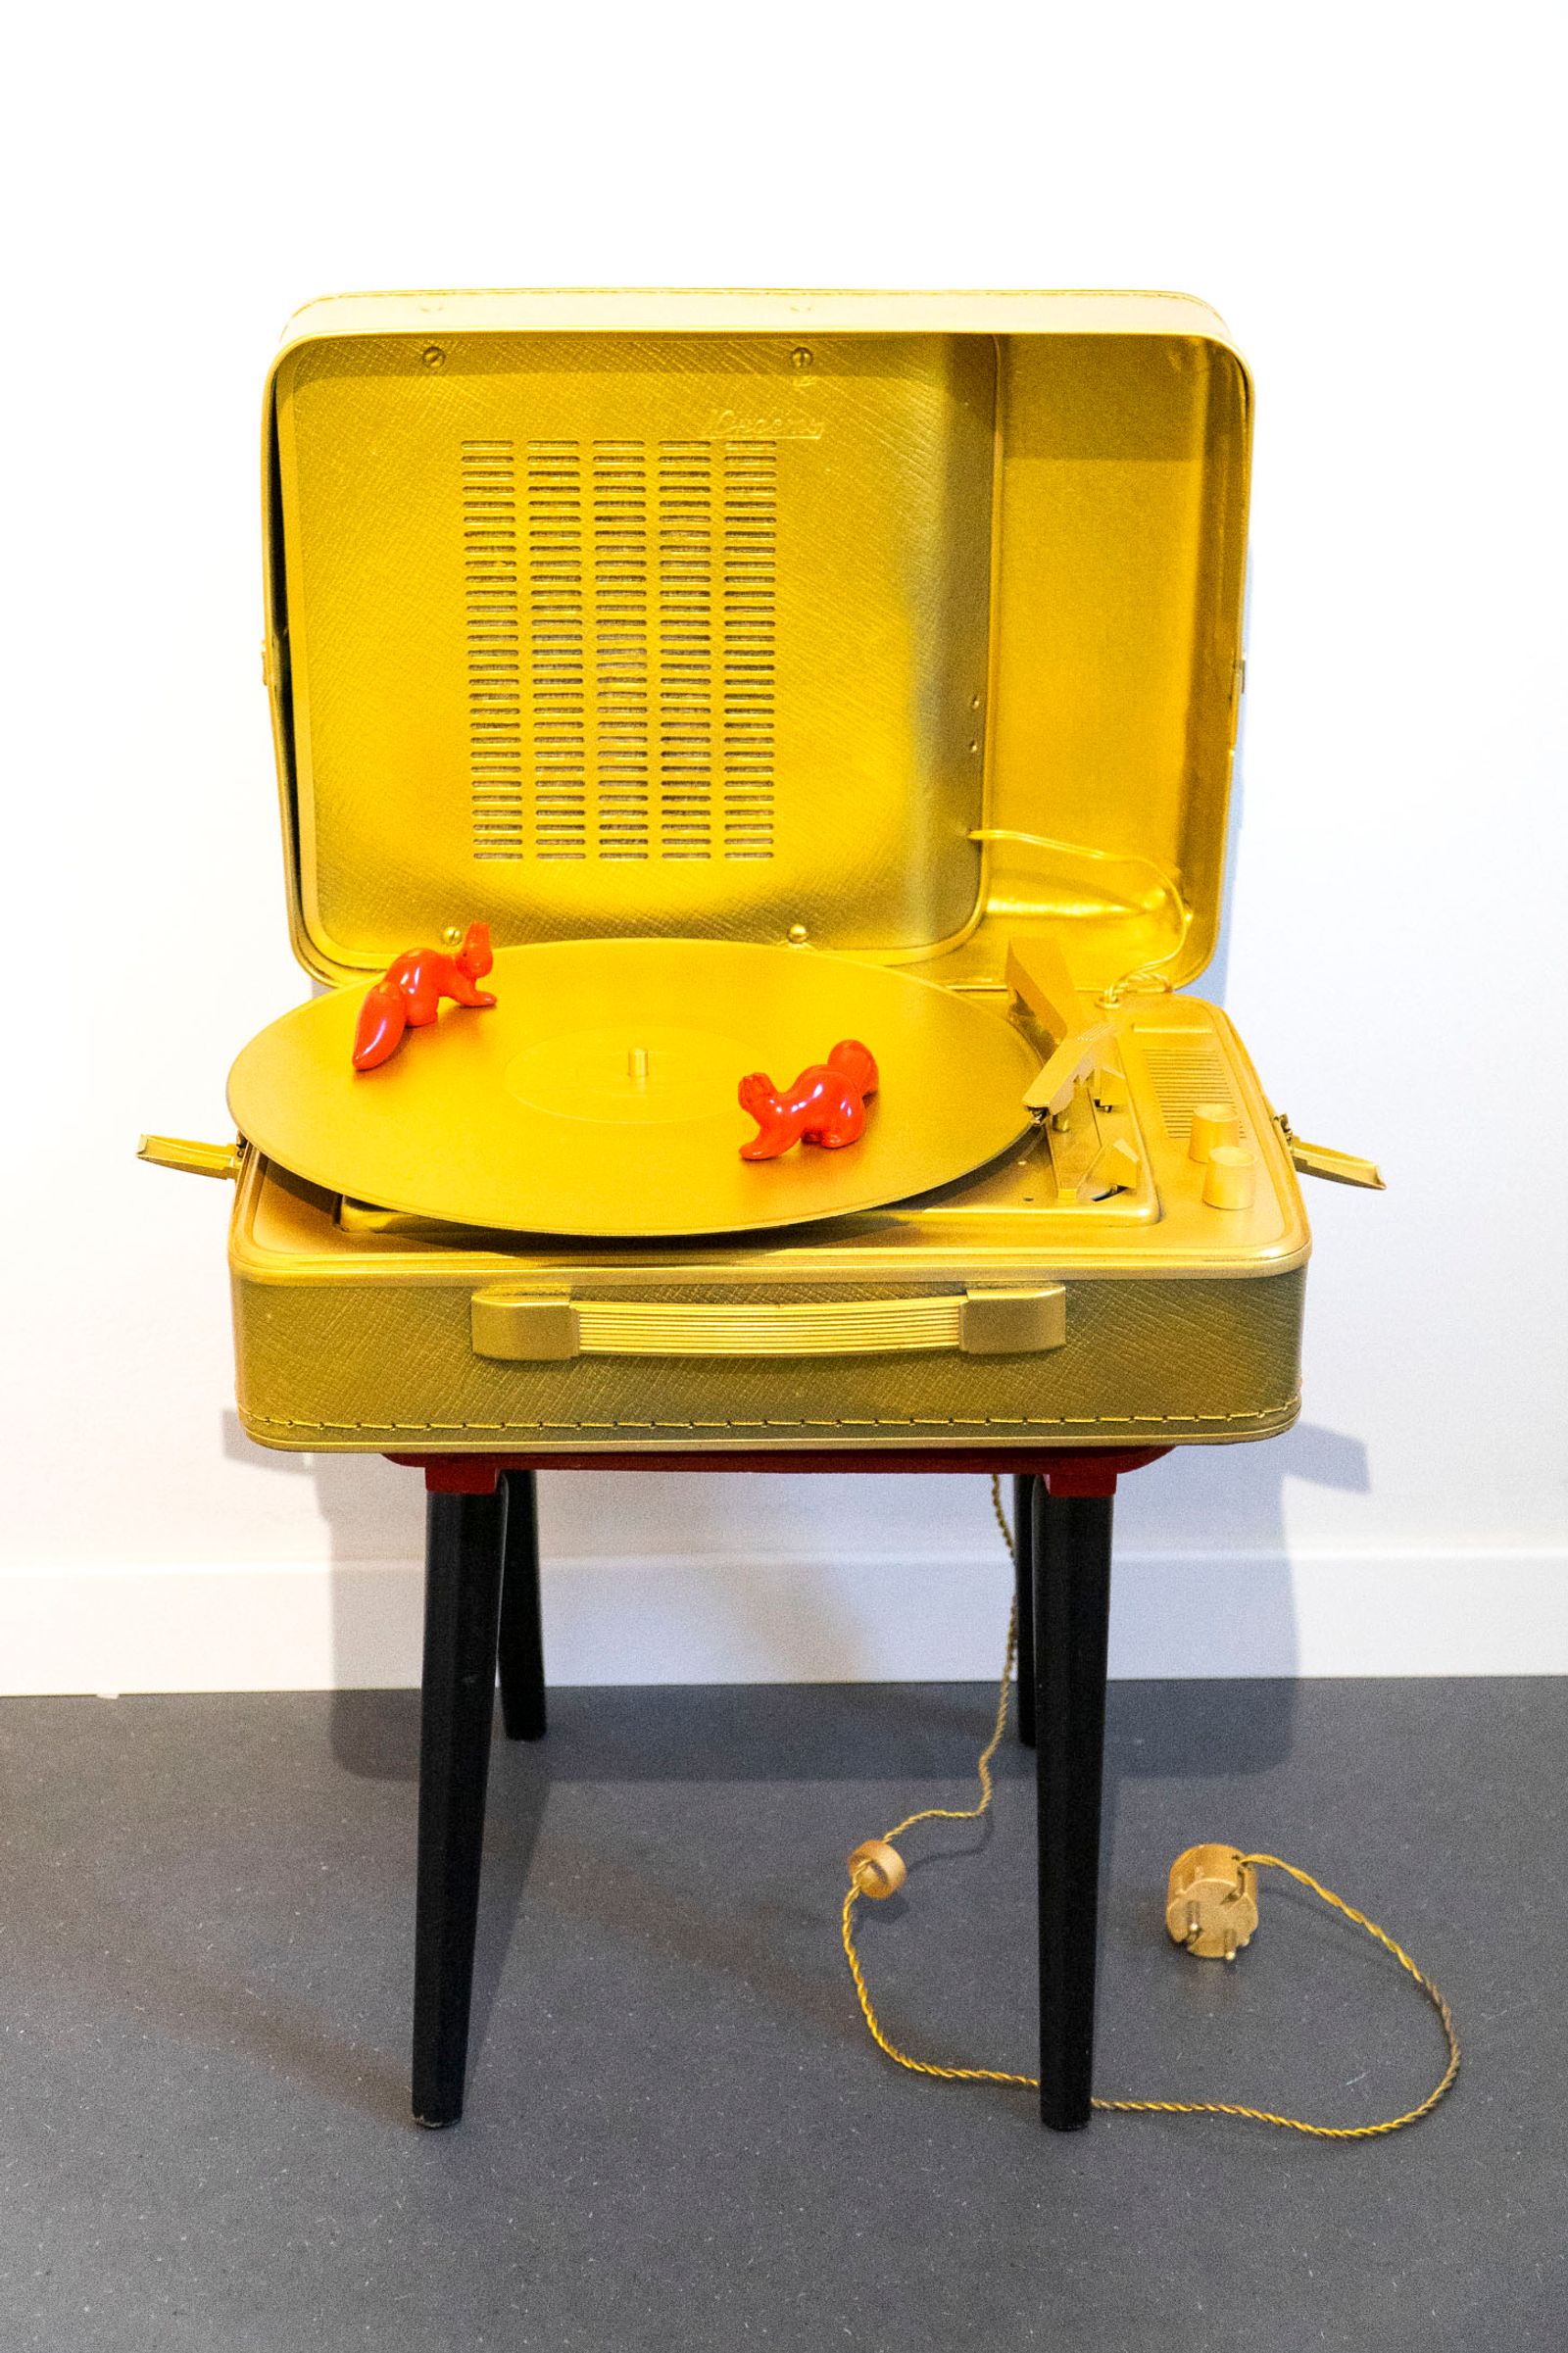 © Ira Thiessen - Gold-plated record player